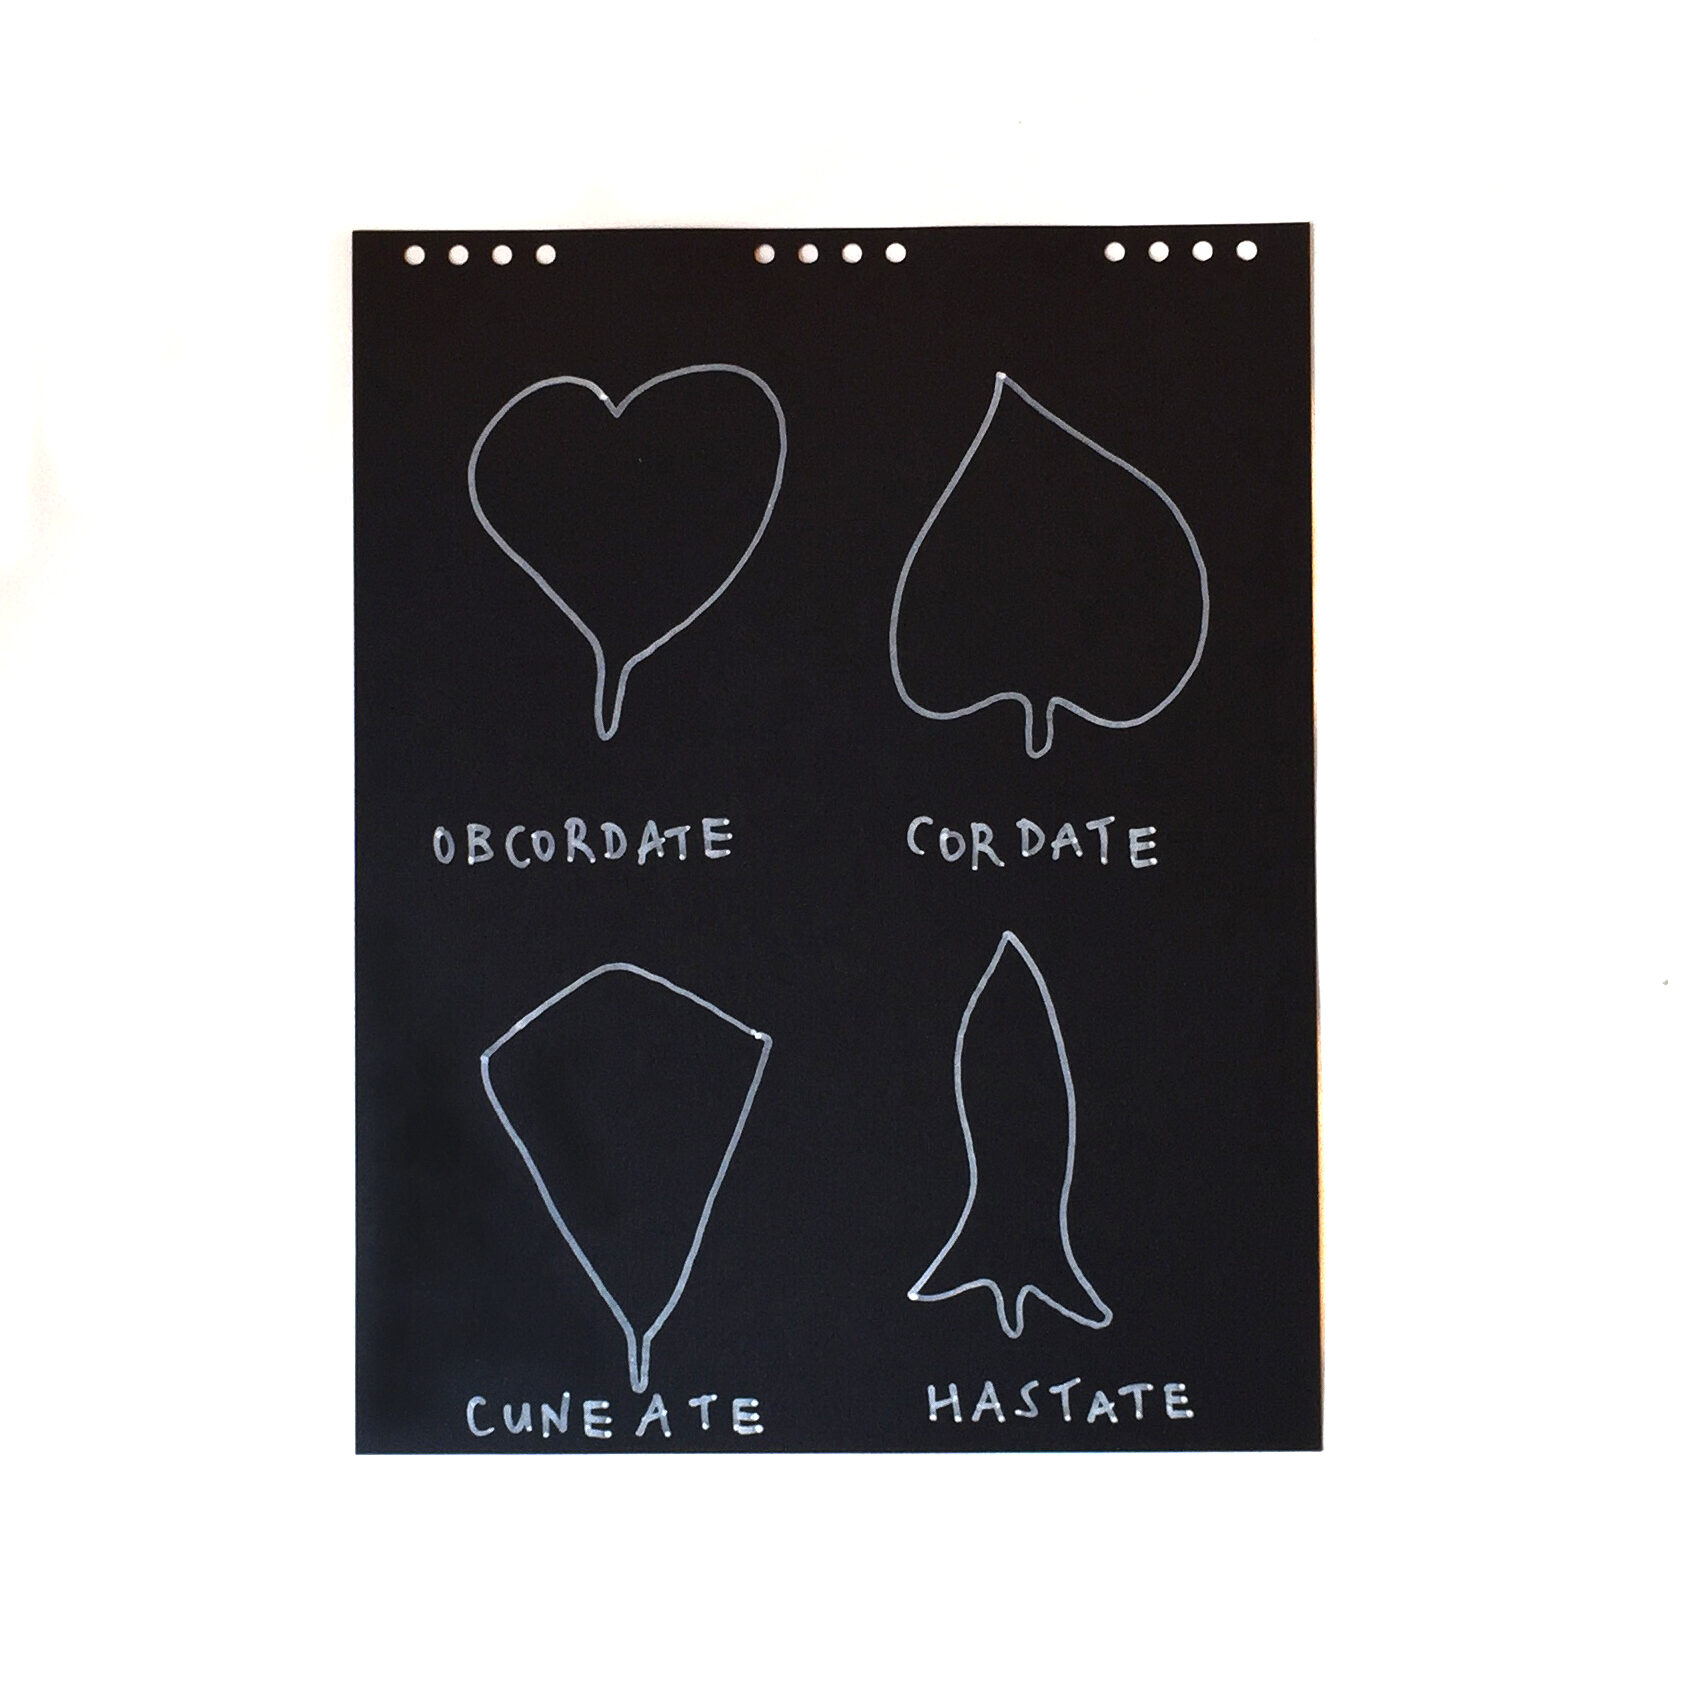 Yto Barrada, Botanical (Leaf-Shapes-Trees) Fig. 1 (of 4), Drawings on paper, 2019.